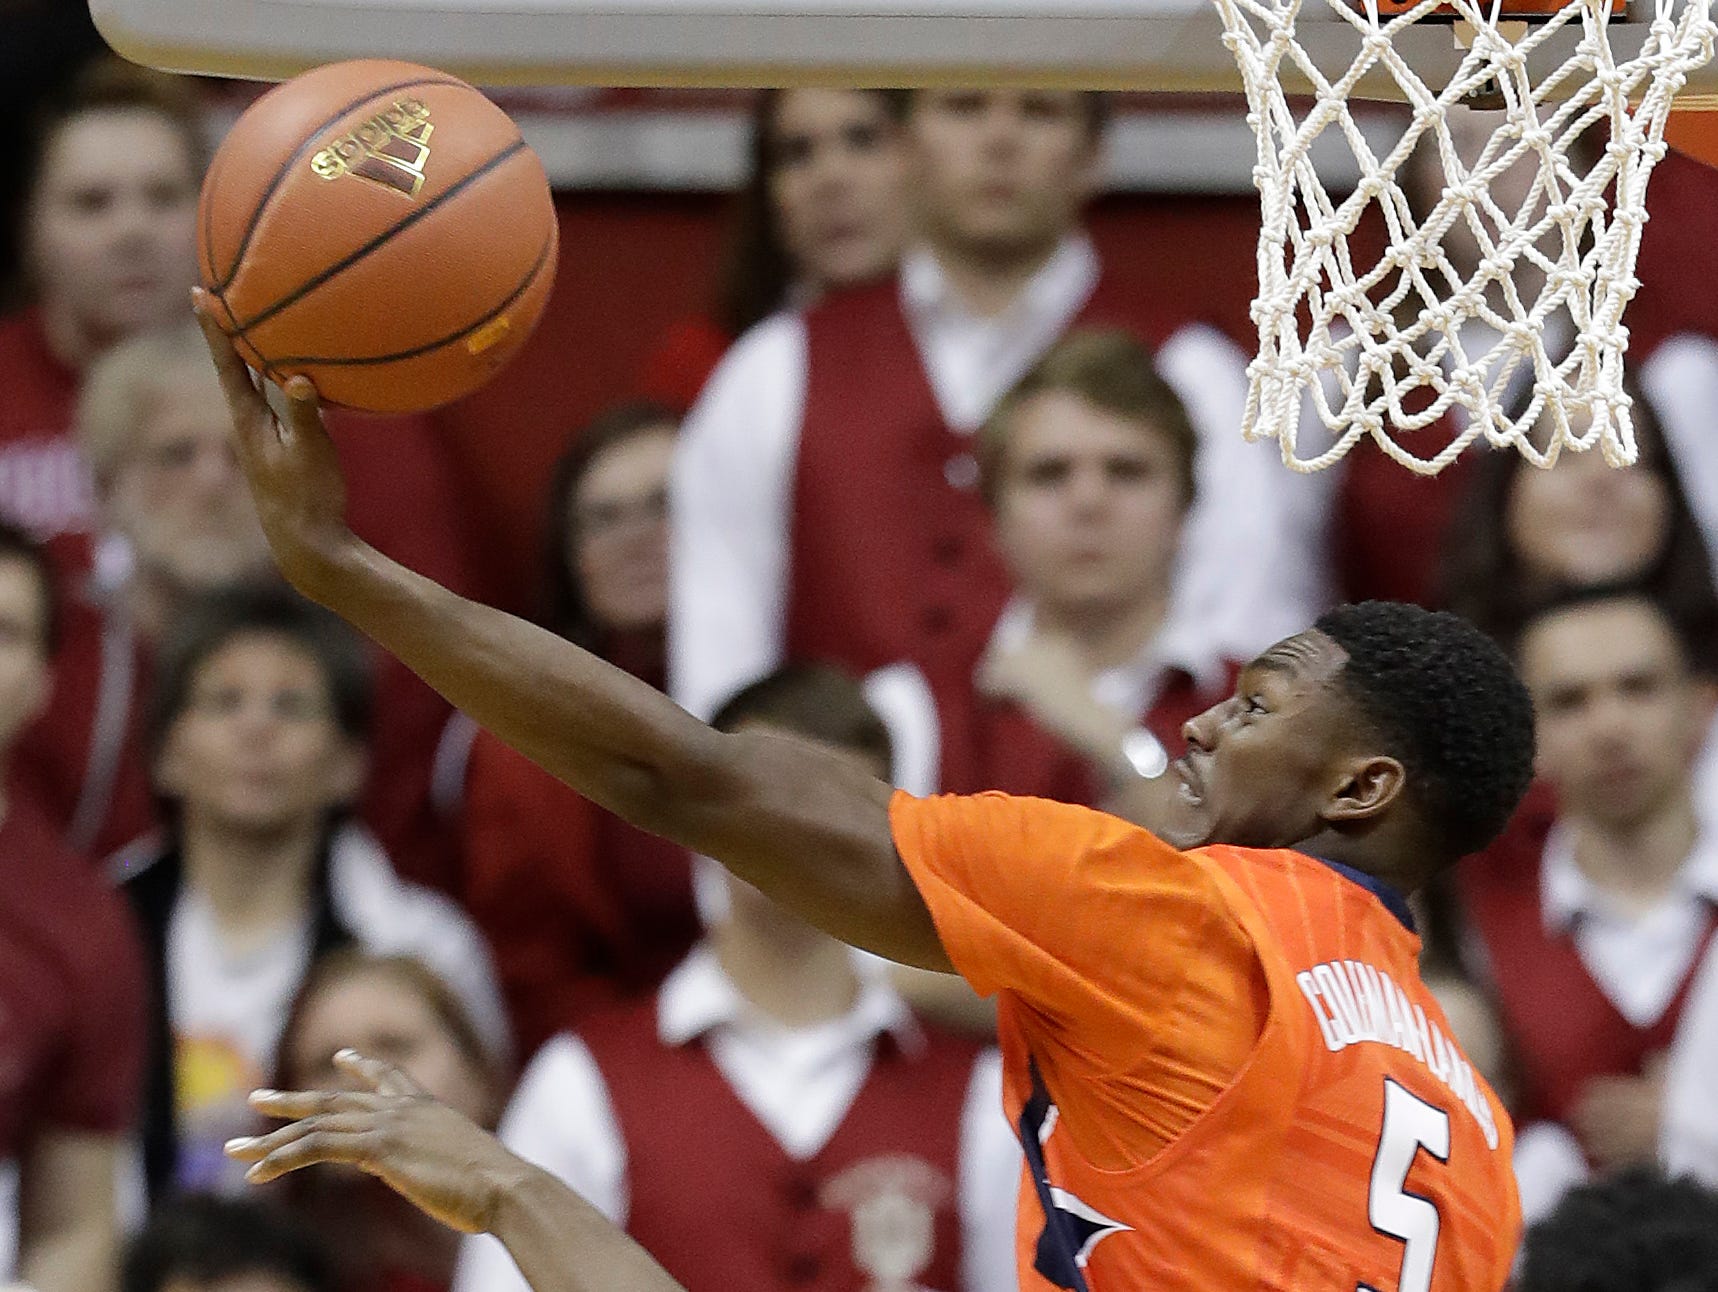 Illinois's Jalen Coleman-Lands puts up a shot during the second half of an NCAA college basketball game against Indiana, Saturday, Jan. 7, 2017, in Bloomington, Ind. Indiana defeated Illinois 96-80. (AP Photo/Darron Cummings)